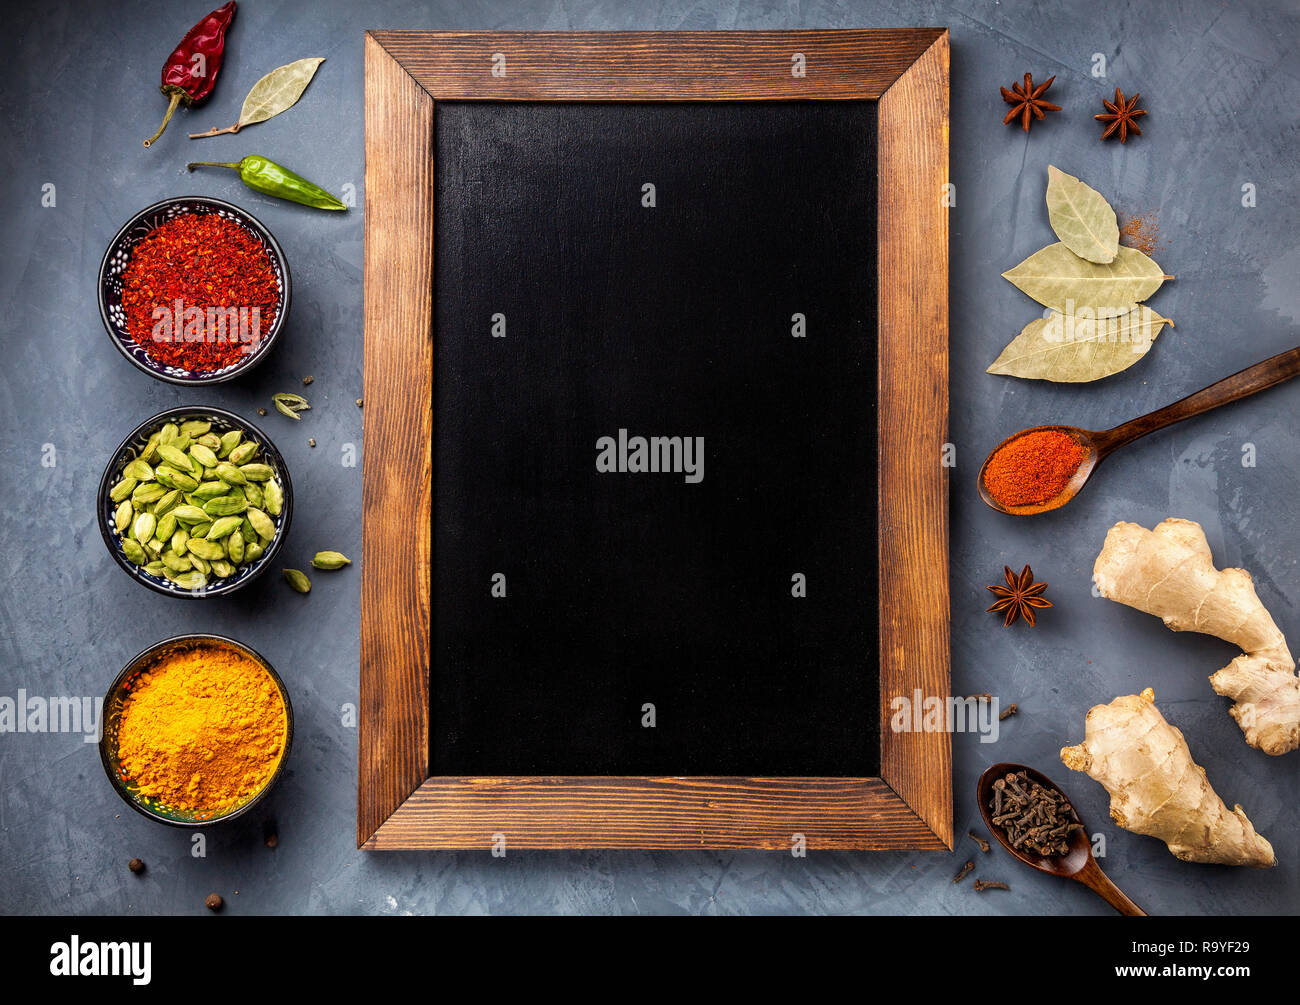 Various Spices like turmeric, cardamom, chili, paprika, ginger, star anise and clove near blackboard on grunge background. Free space for your text Stock Photo